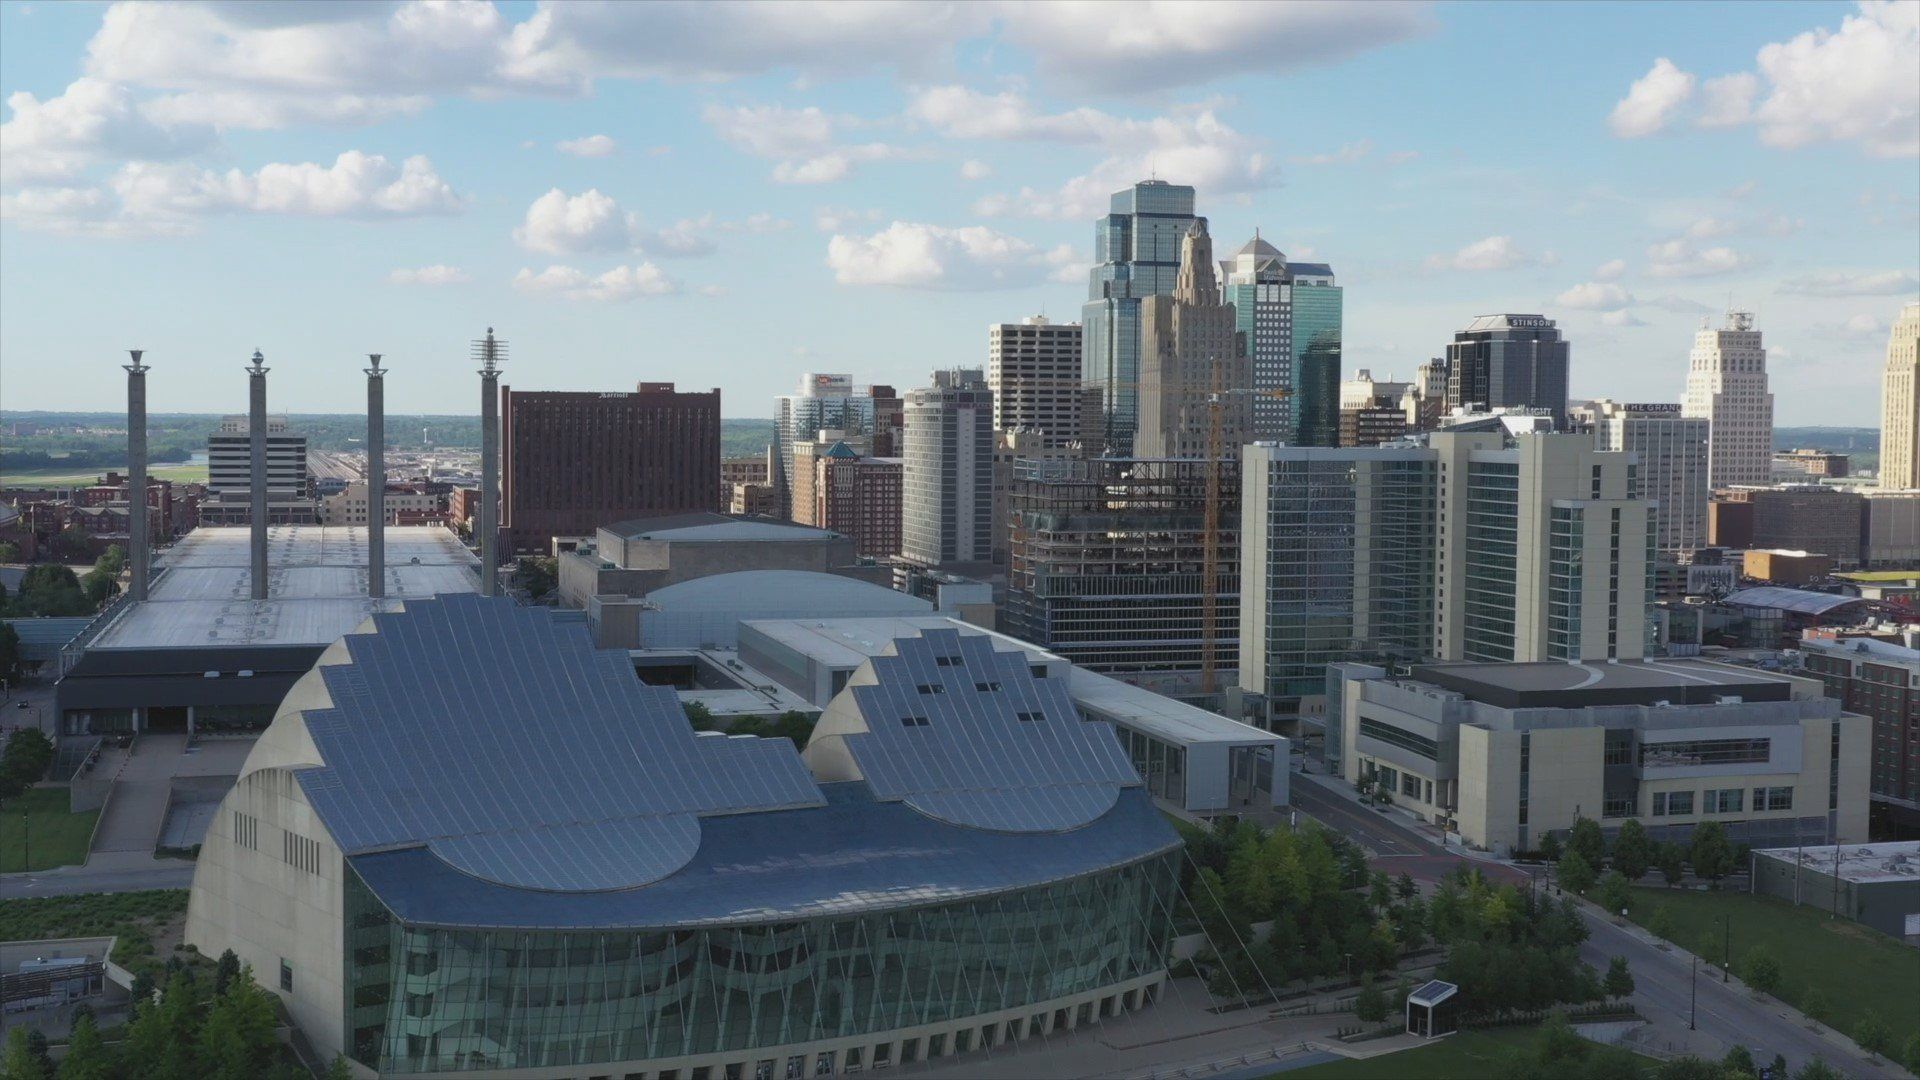 Downtown Kansas City aerial shot showing Kauffman Performing Arts center in the front with the 4 pillars of Bartle Hall behind and the skyscrapers filling in